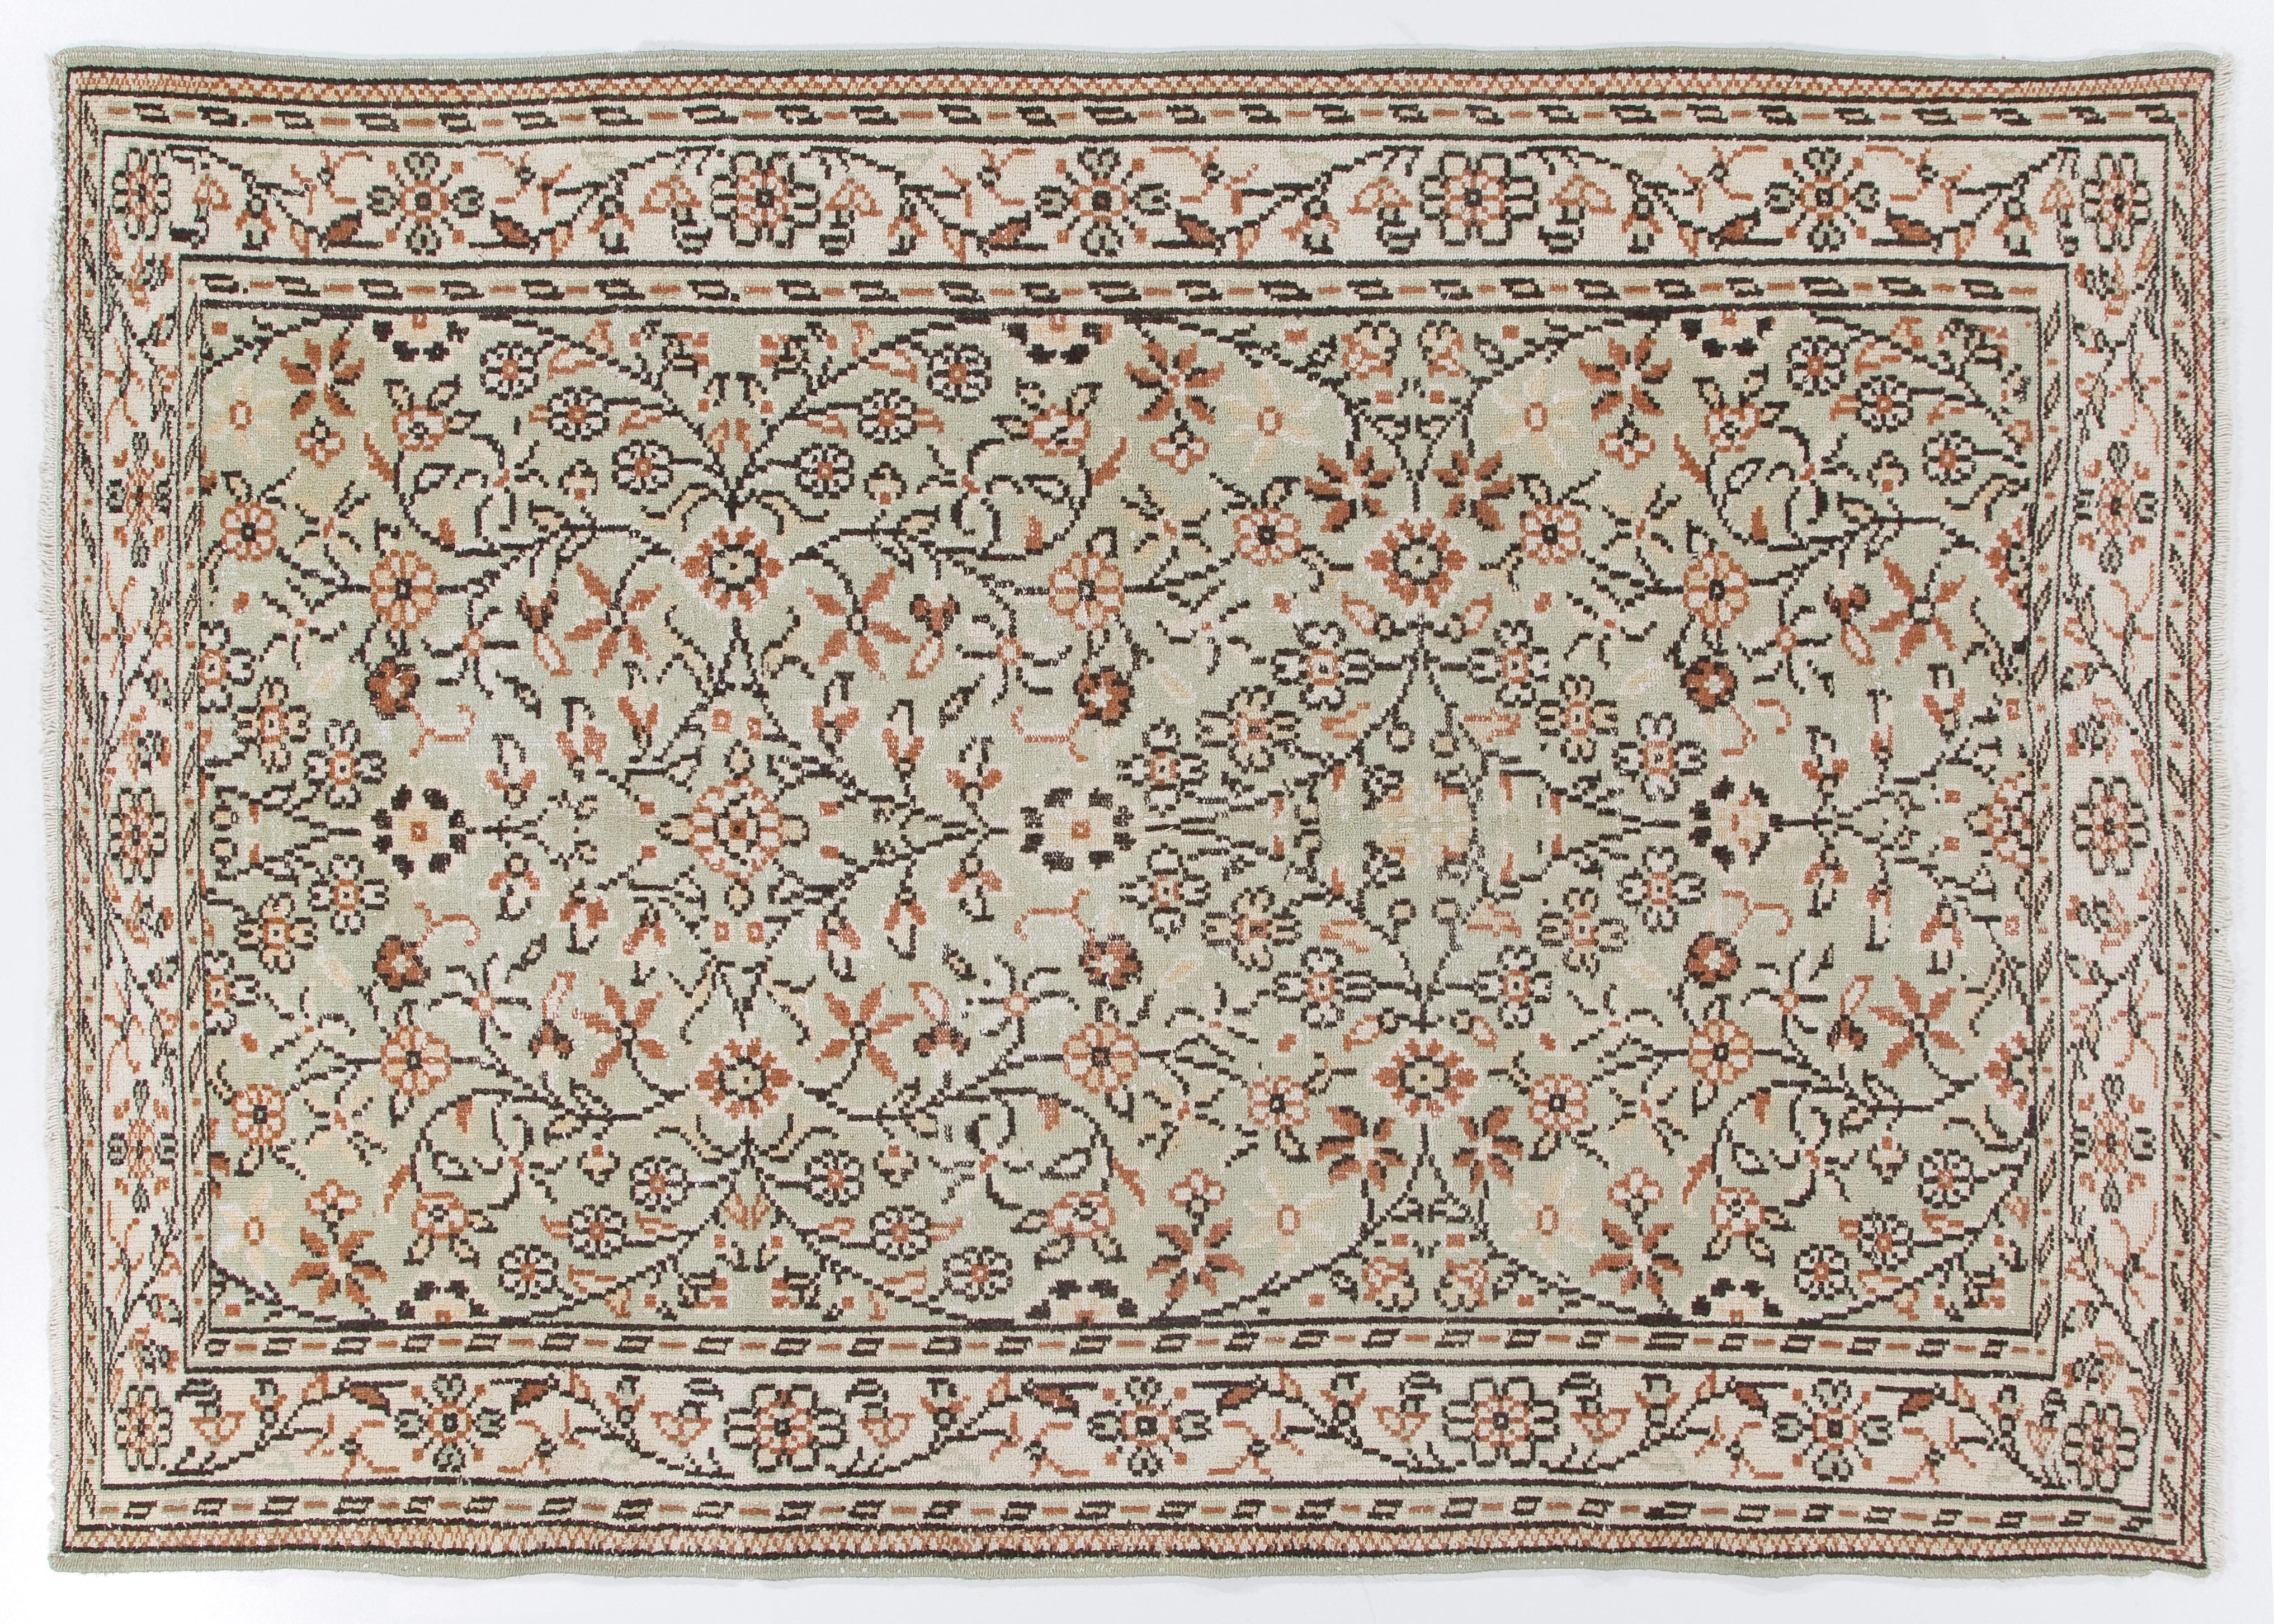 6.2x9 ft Vintage Hand-Knotted Turkish Floral Wool Rug in Cream and Pastel Green In Good Condition For Sale In Philadelphia, PA